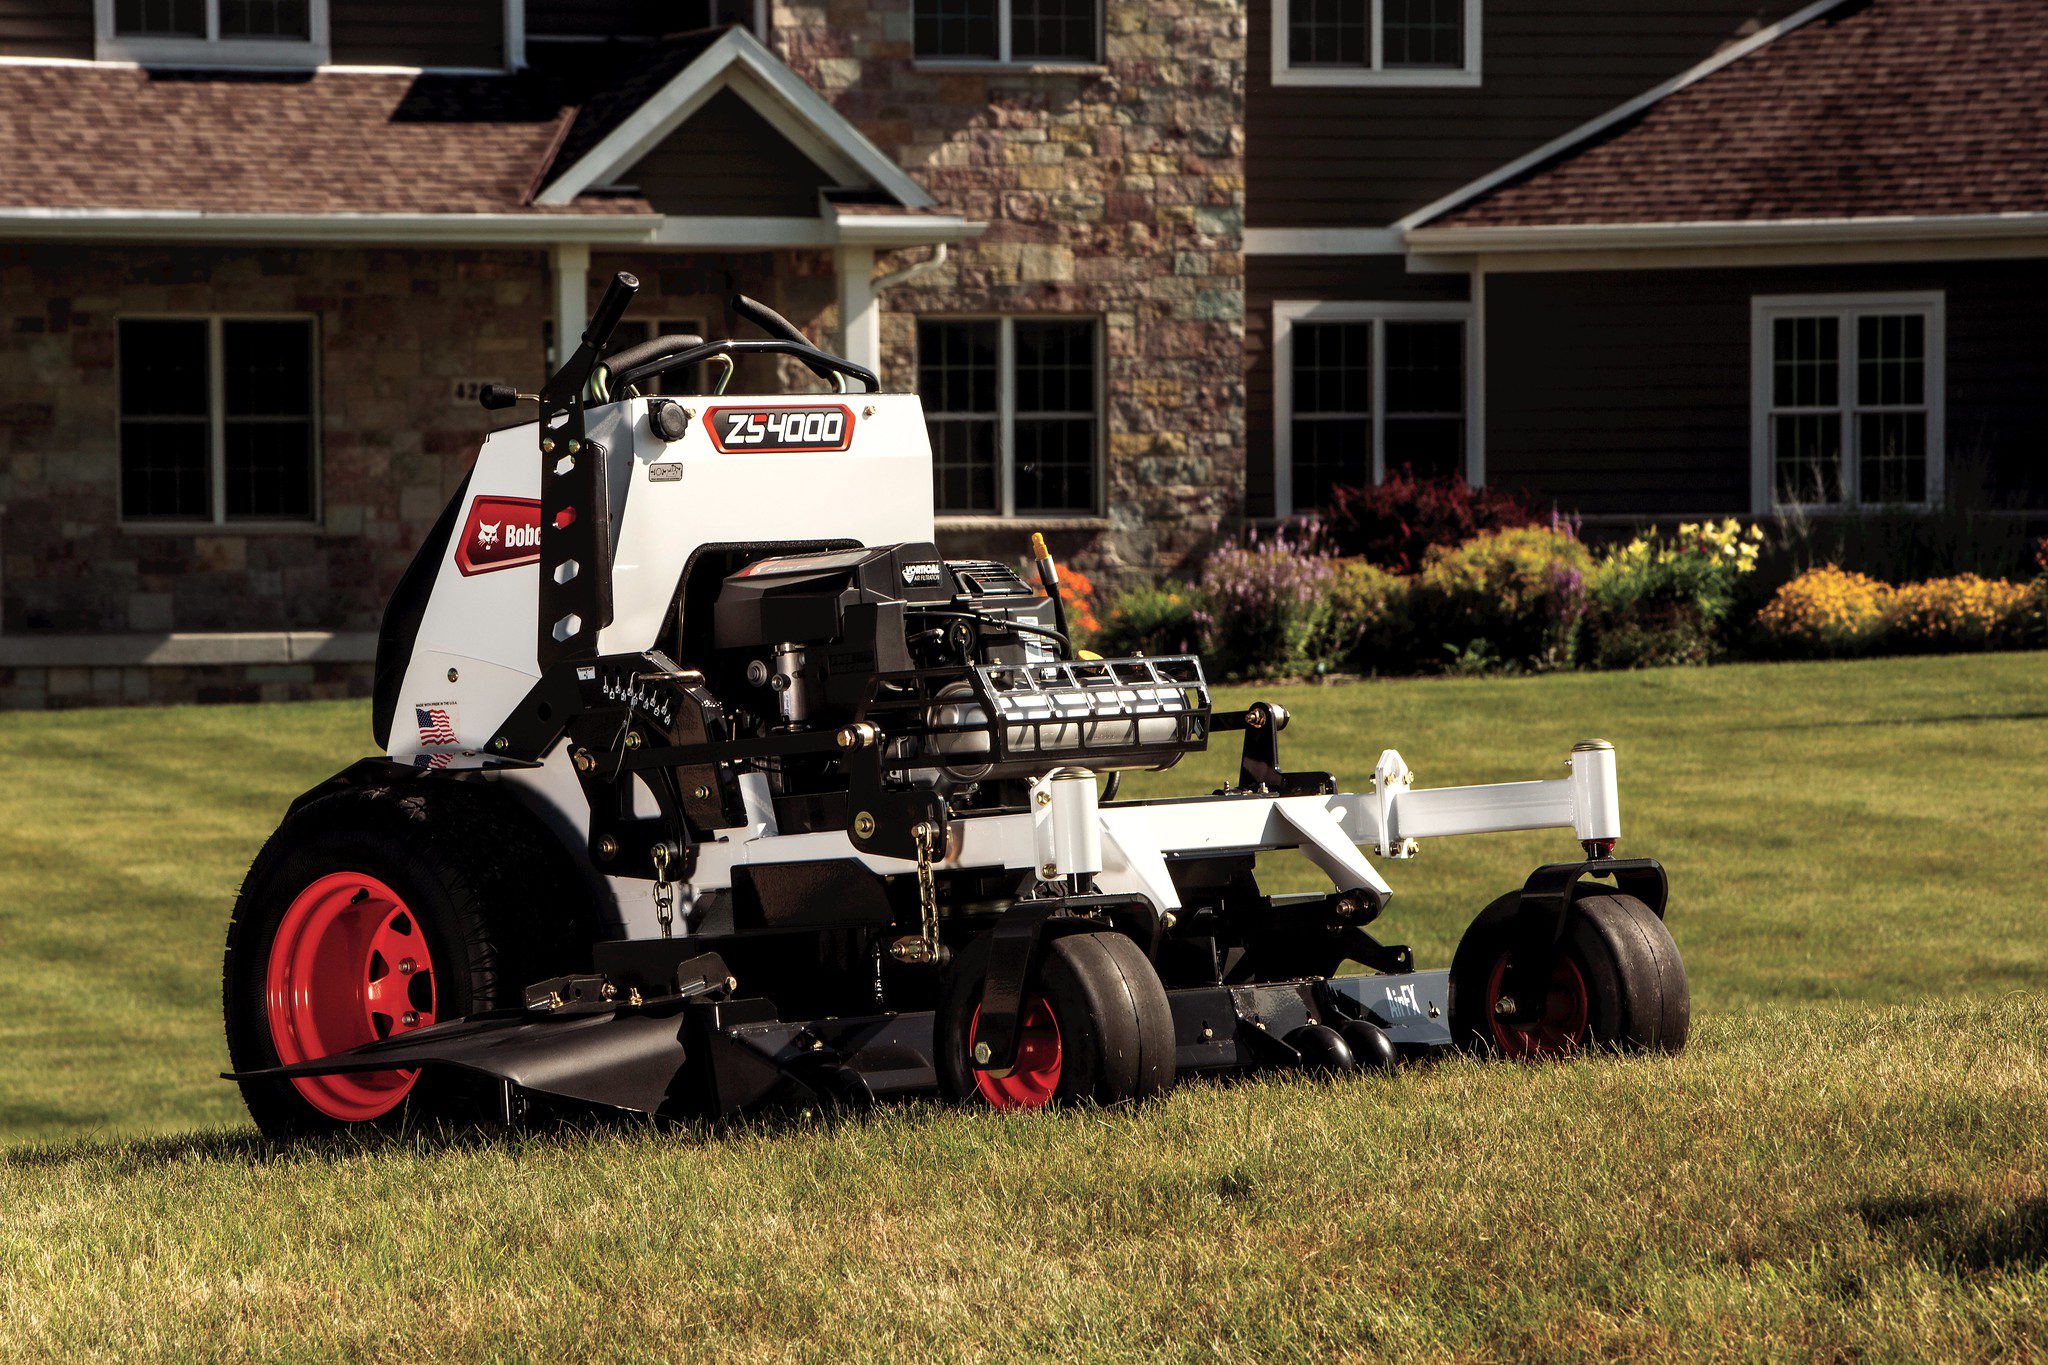 Browse Specs and more for the Bobcat ZS4000 Stand-On Mower 61″ - Bobcat of Huntsville